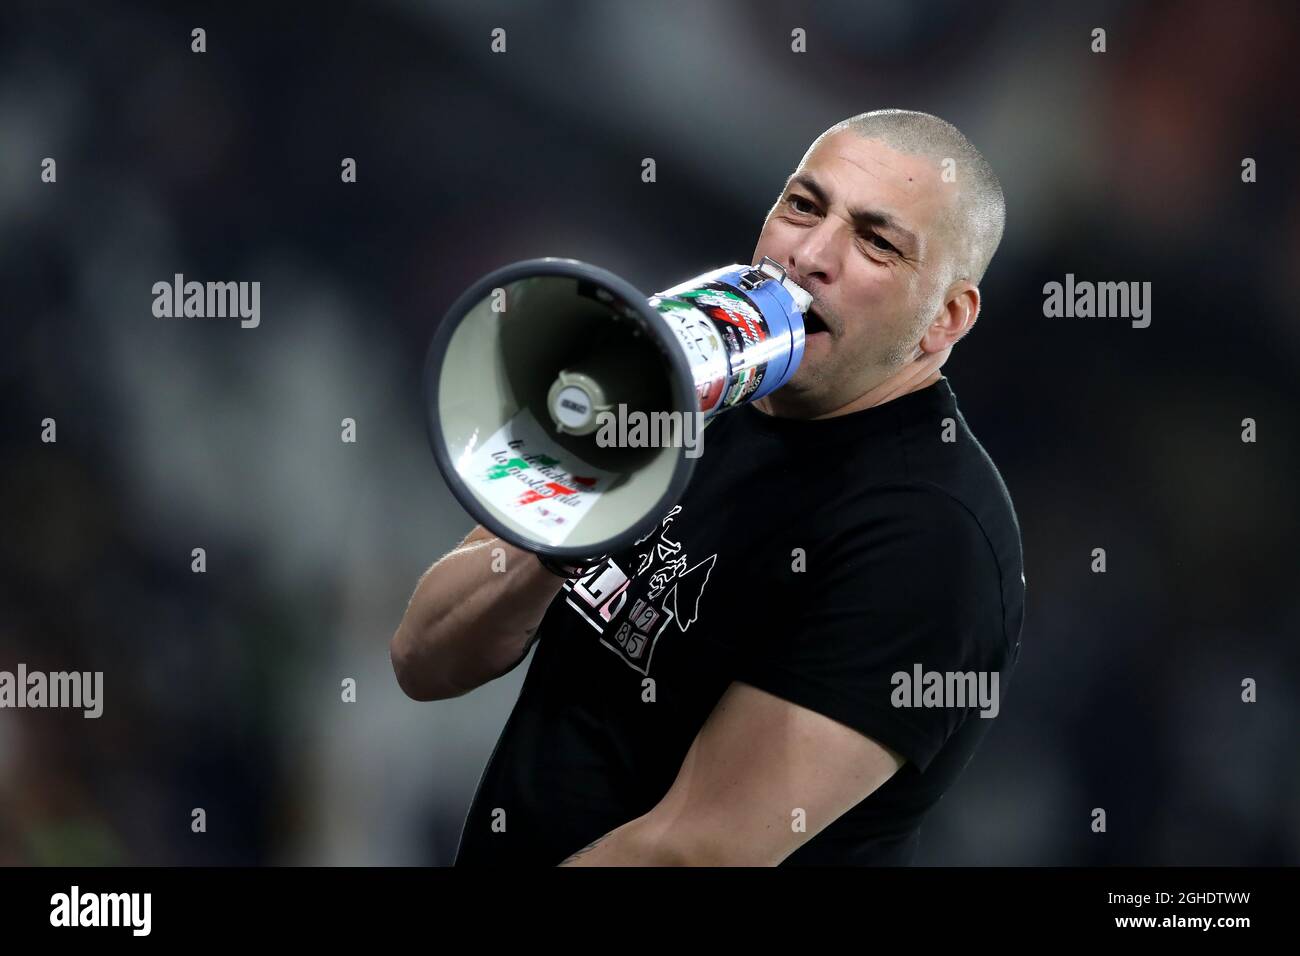 A Juventus Ultra shouts down his megaphone during the Serie A match at  Allianz Stadium, Turin.